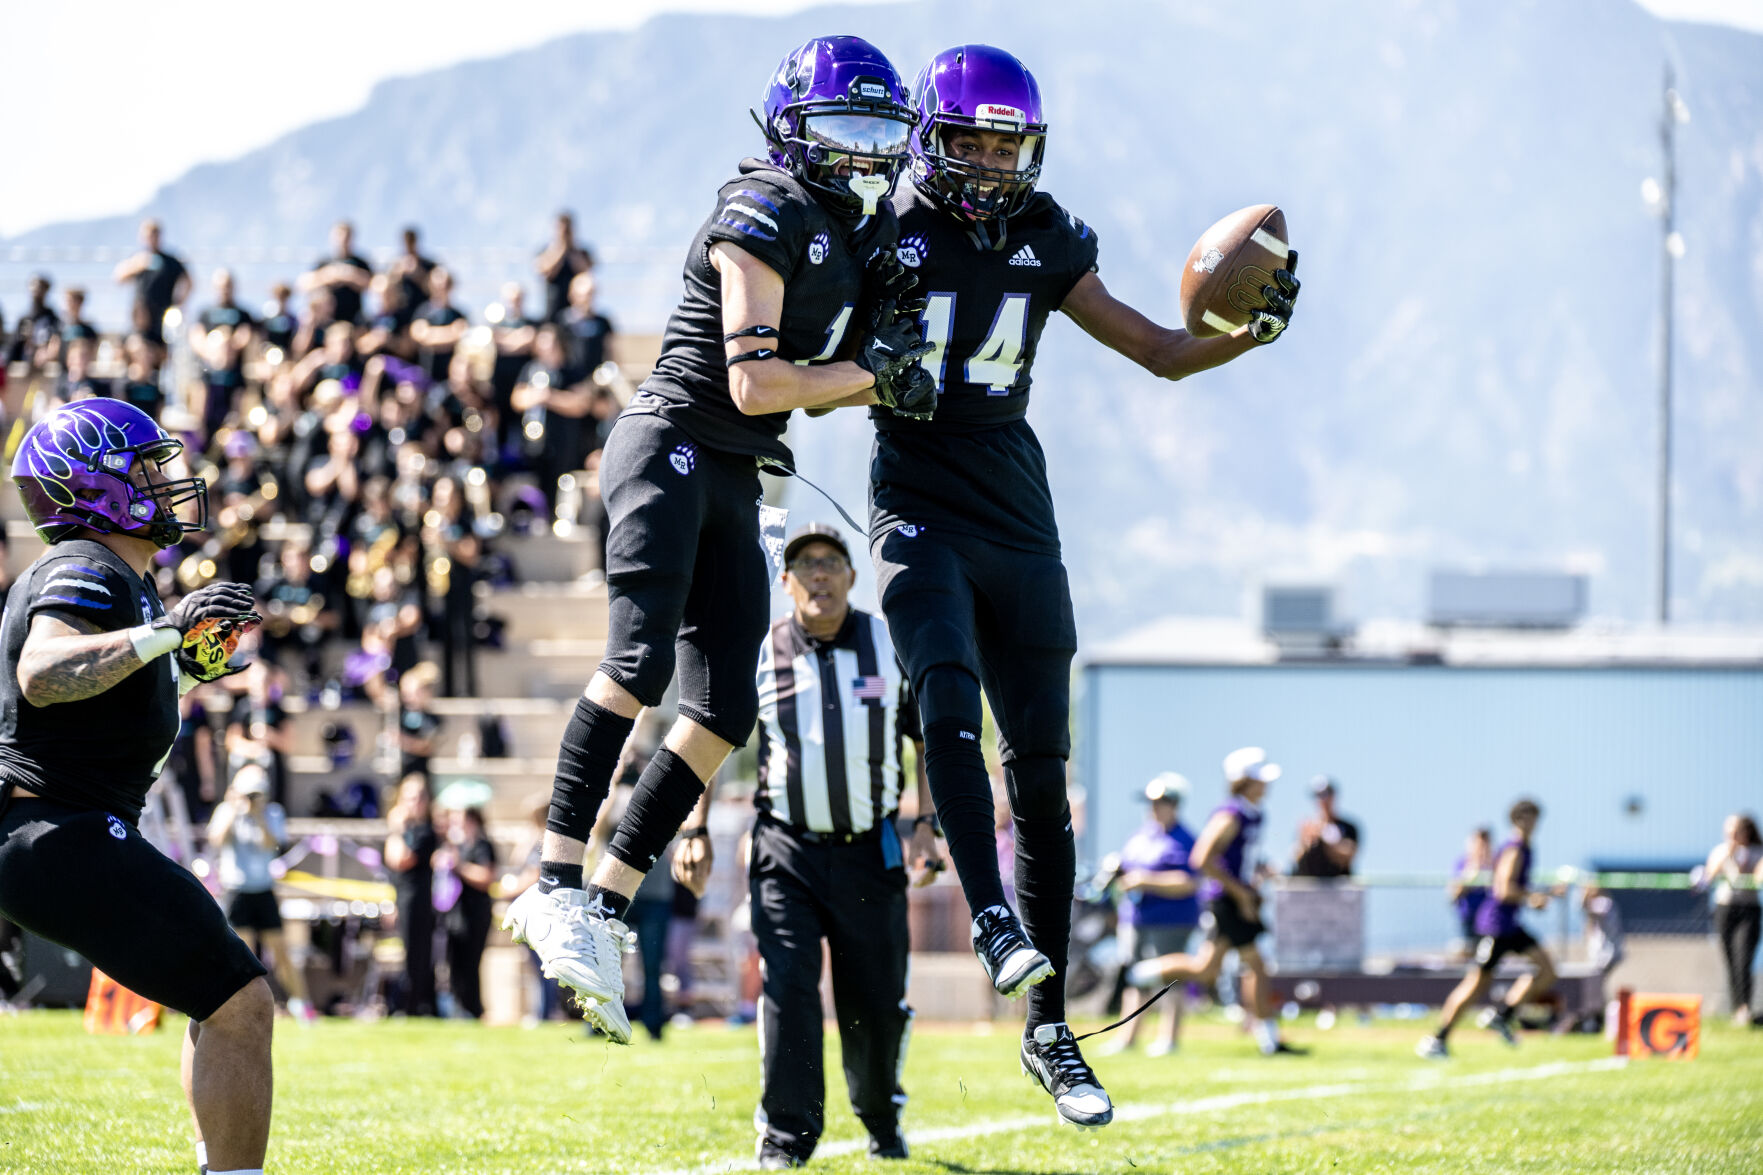 Mesa Ridge Football Dominates Rivalry Game, Securing 66-14 Victory against Widefield